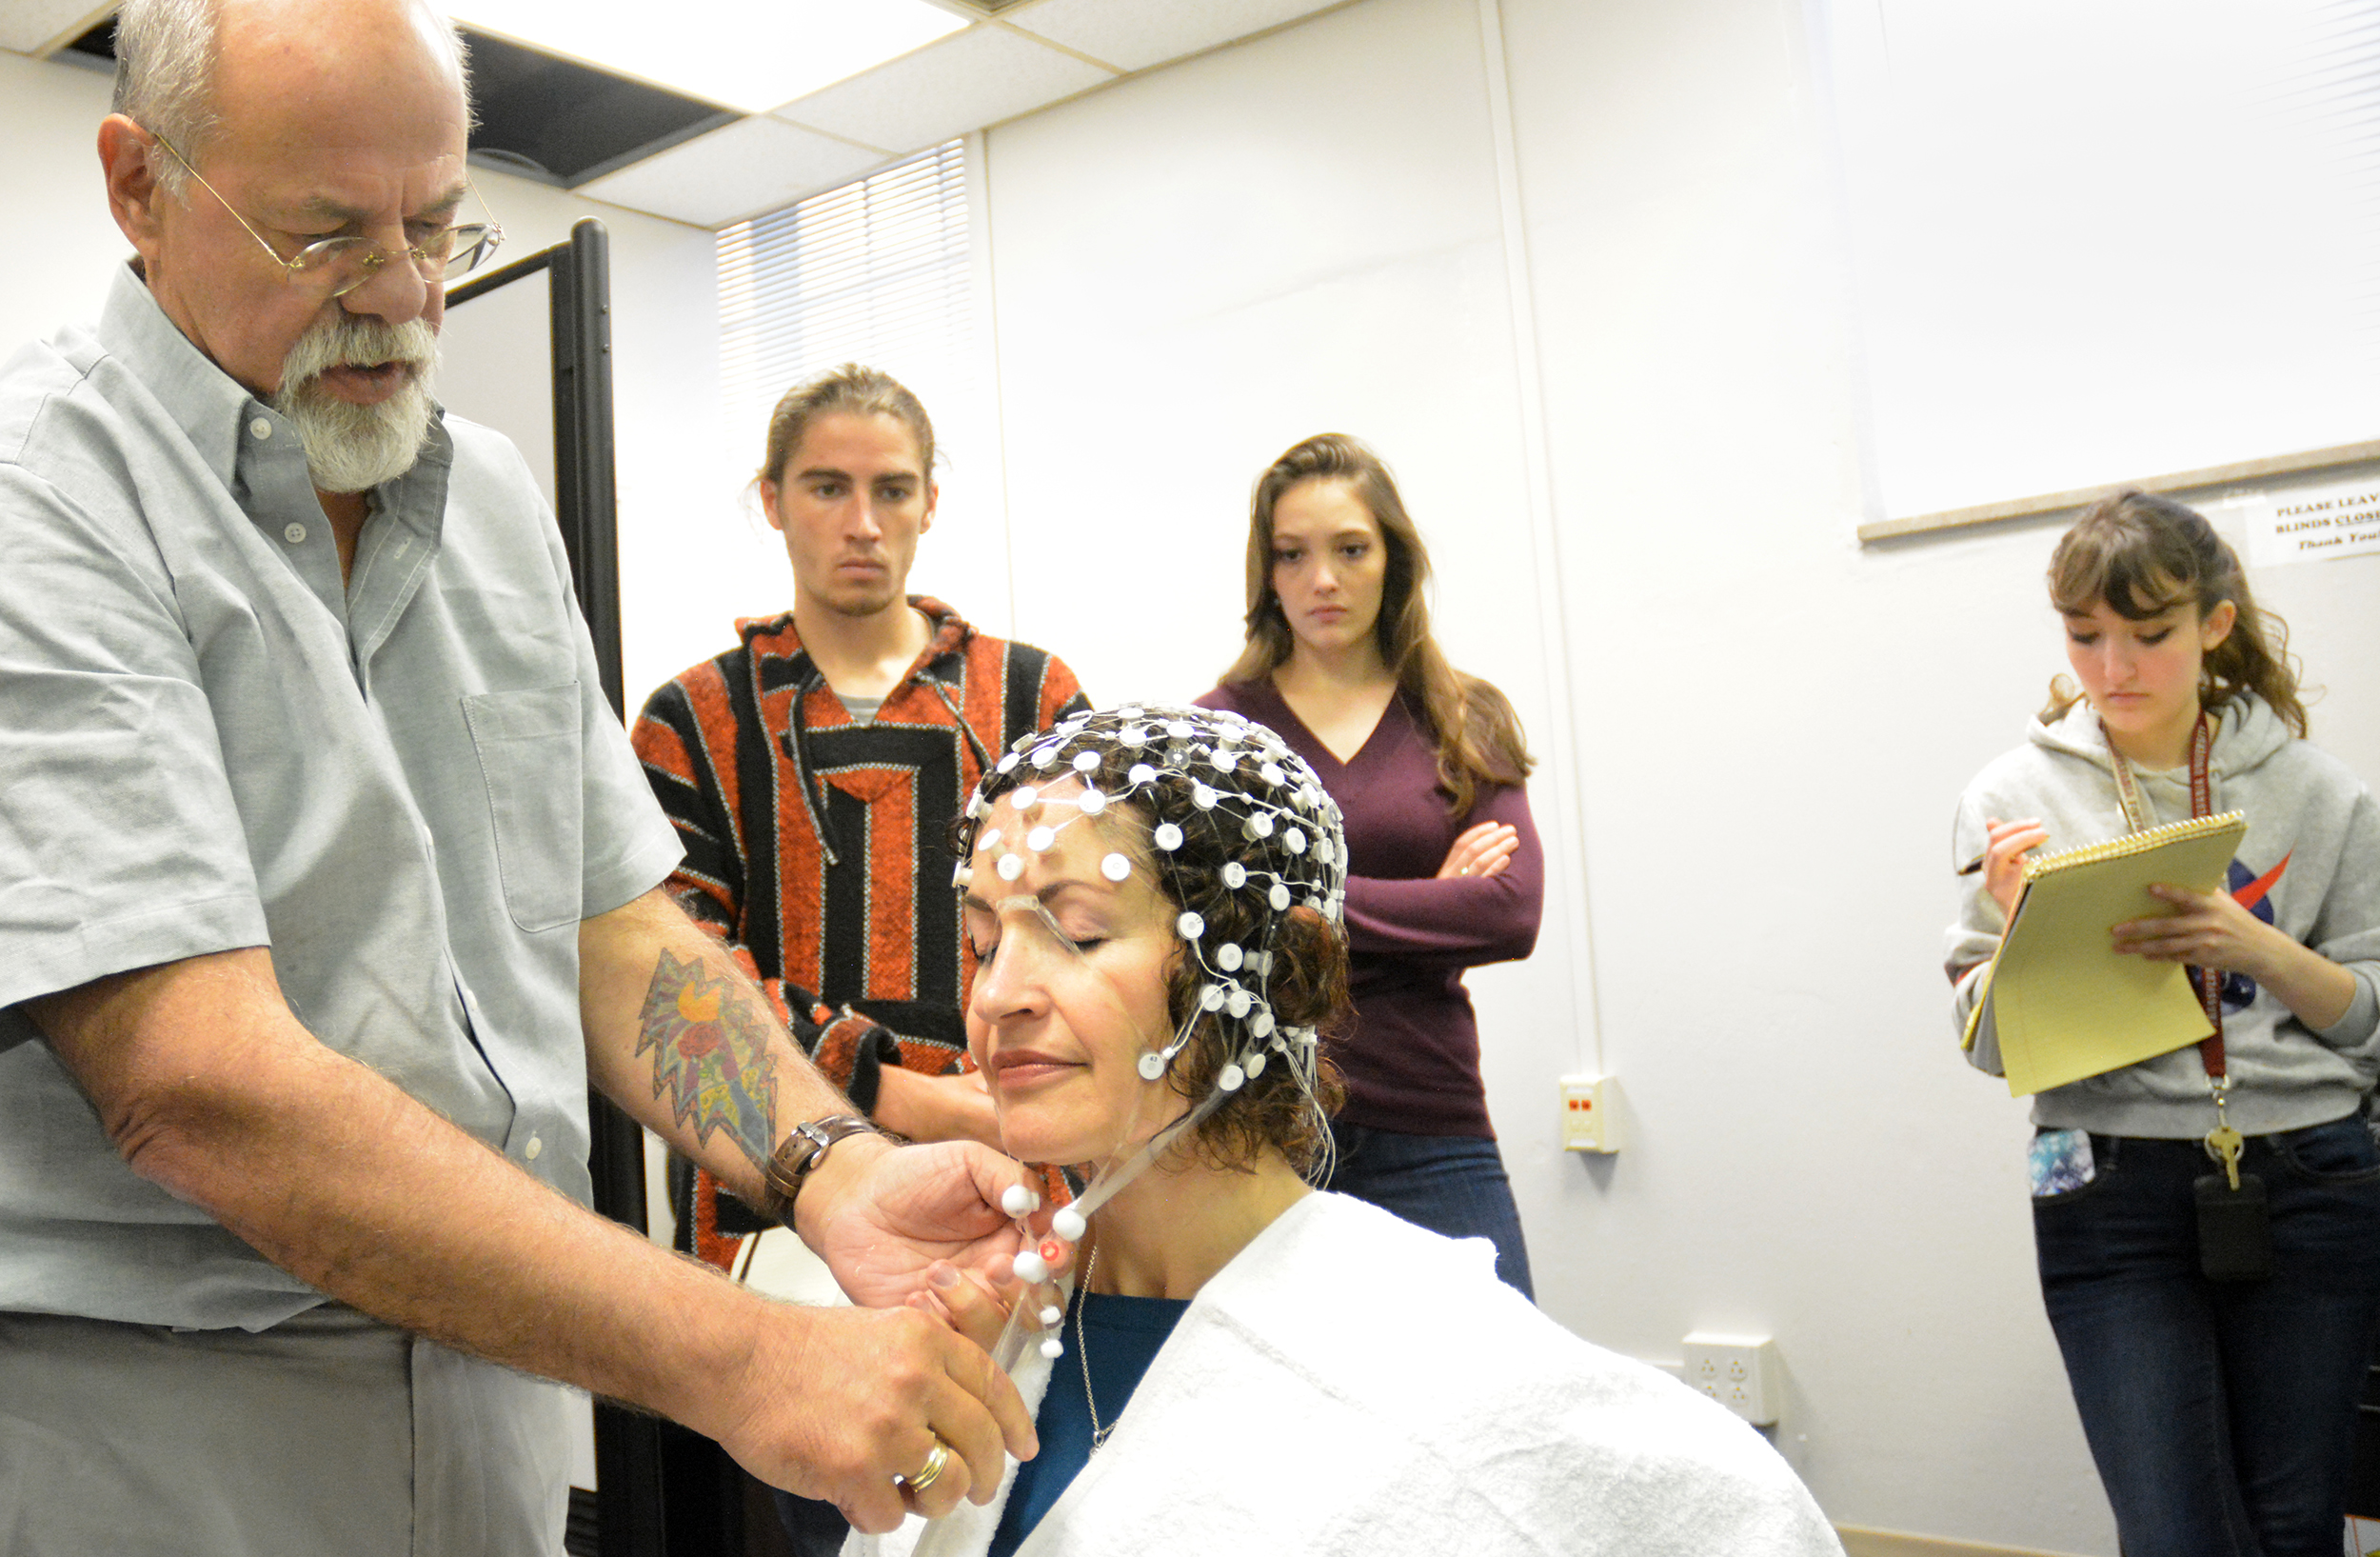 Transy students conduct top-level research with new EEG system